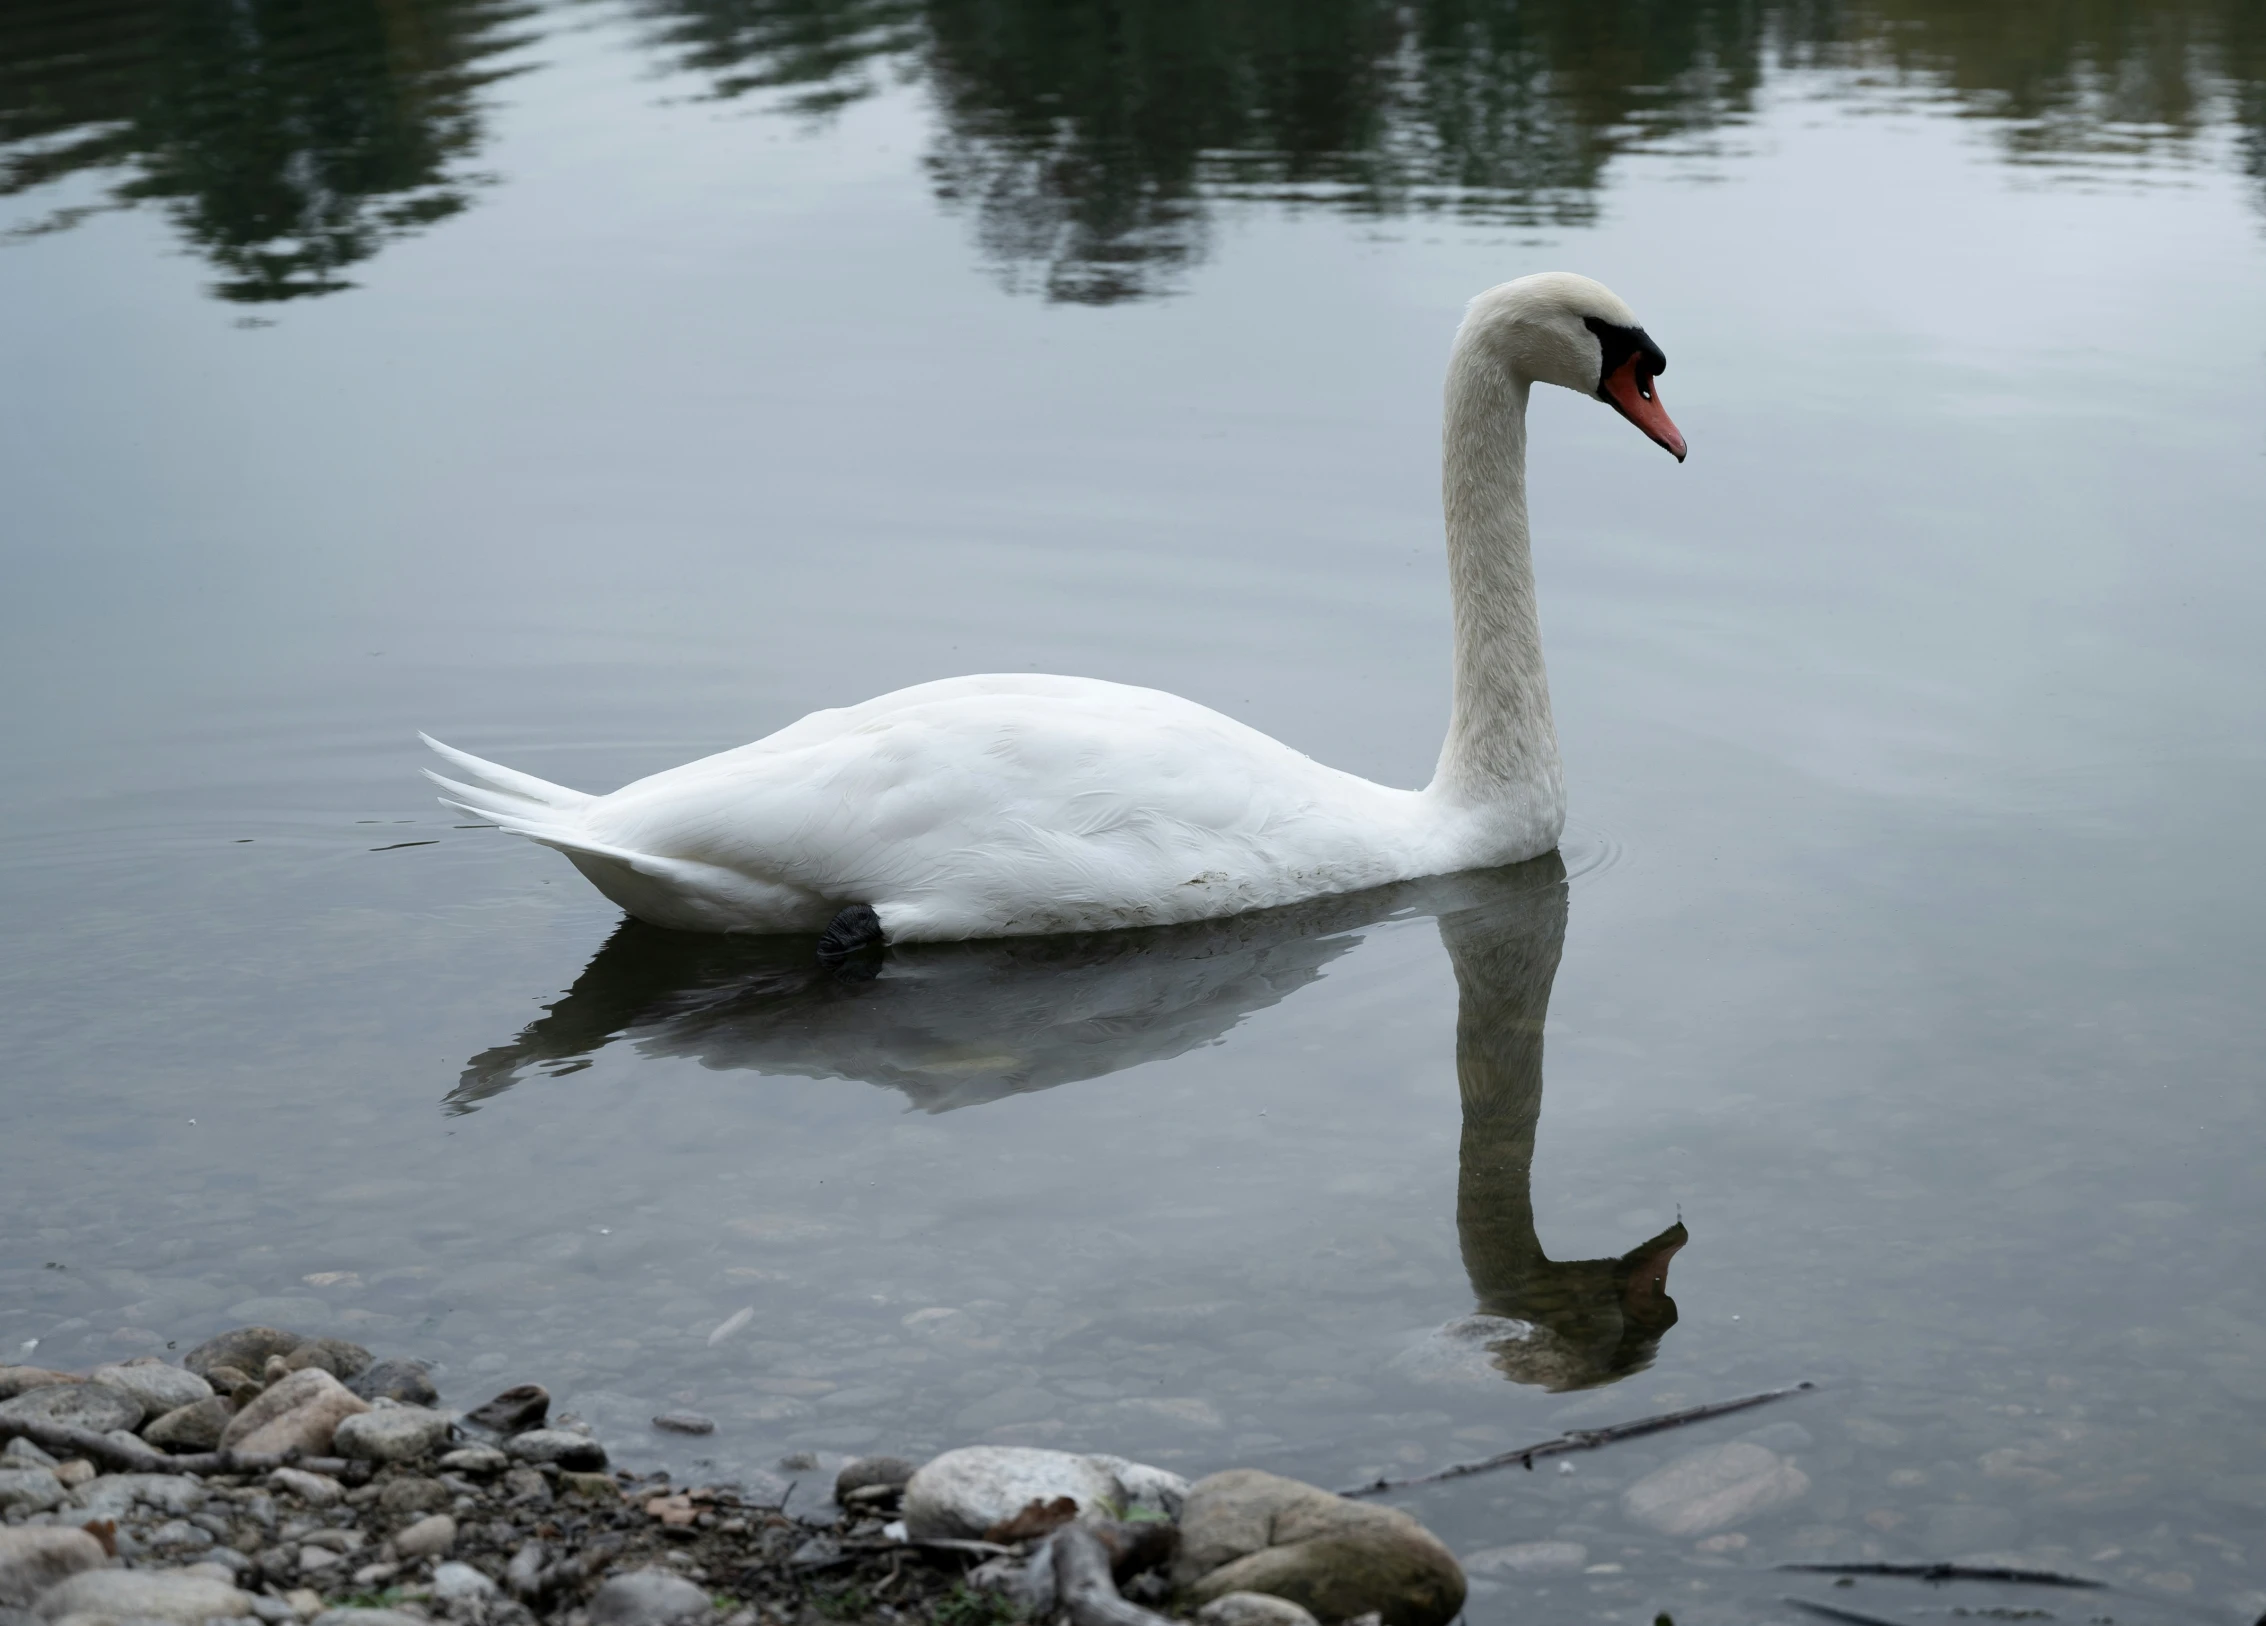 white swan with red beak swimming in a body of water